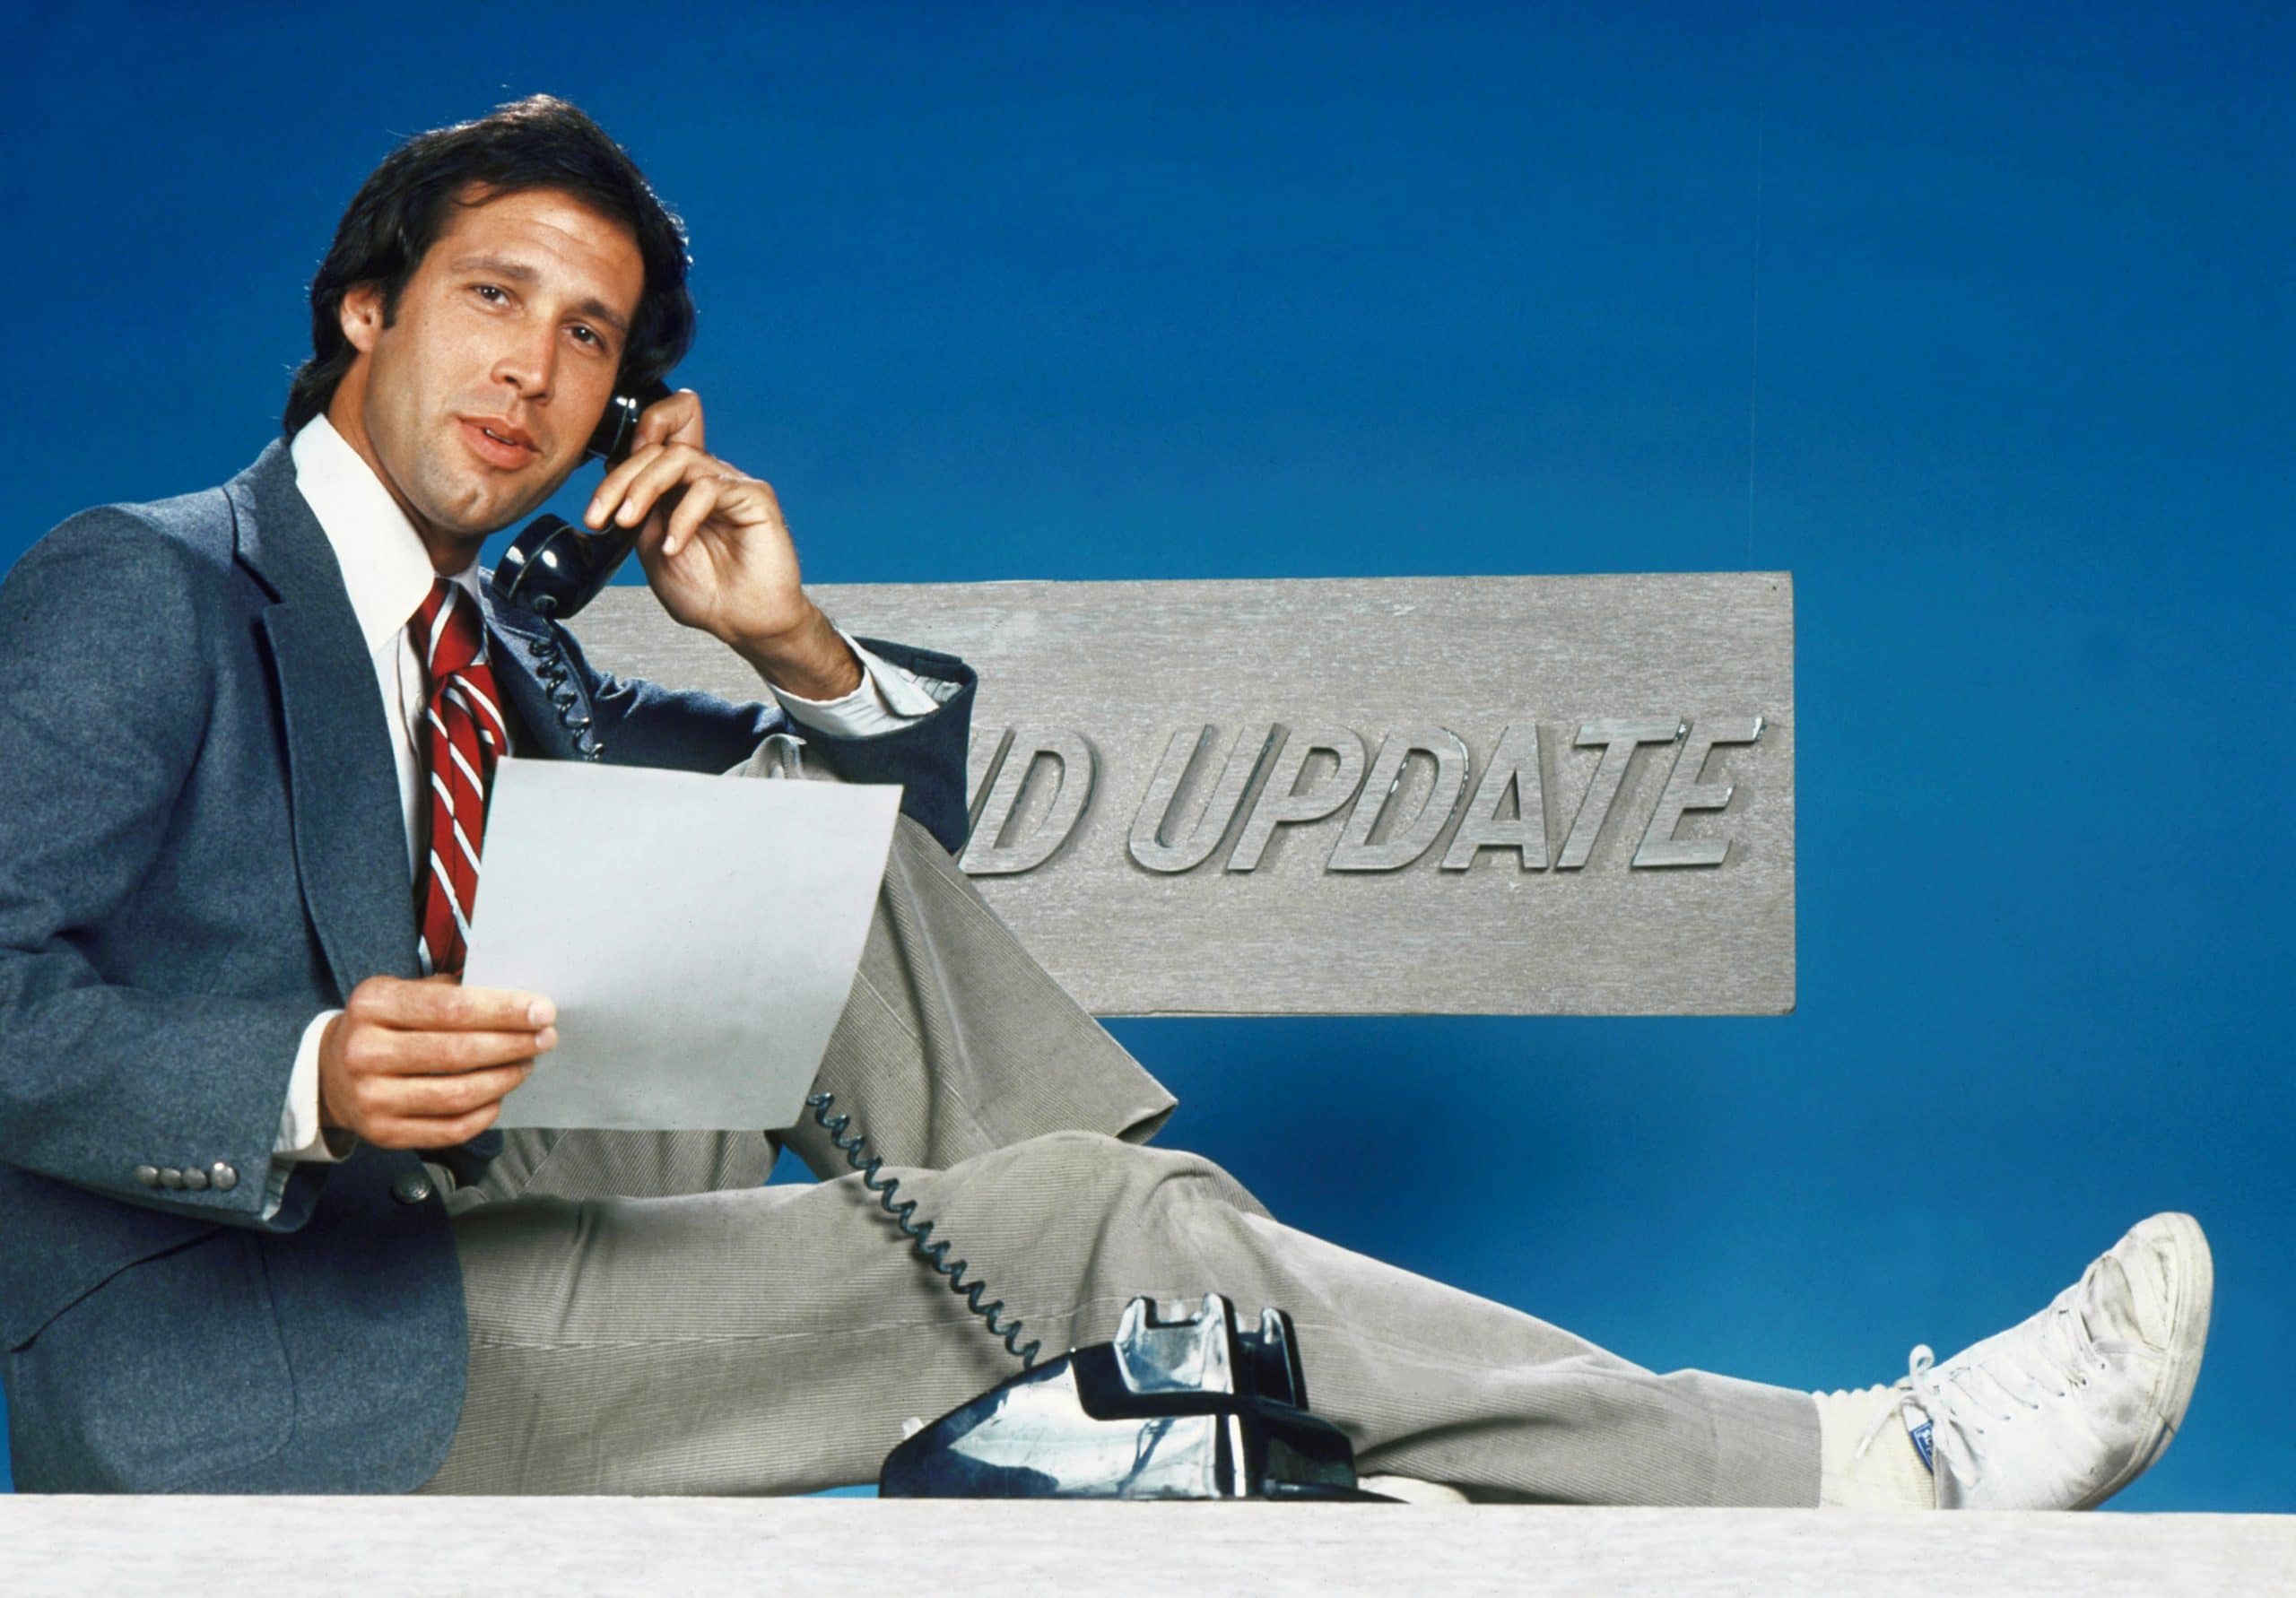 SATURDAY NIGHT LIVE, ('Weekend Update', Season 1), Chevy Chase, 1975-